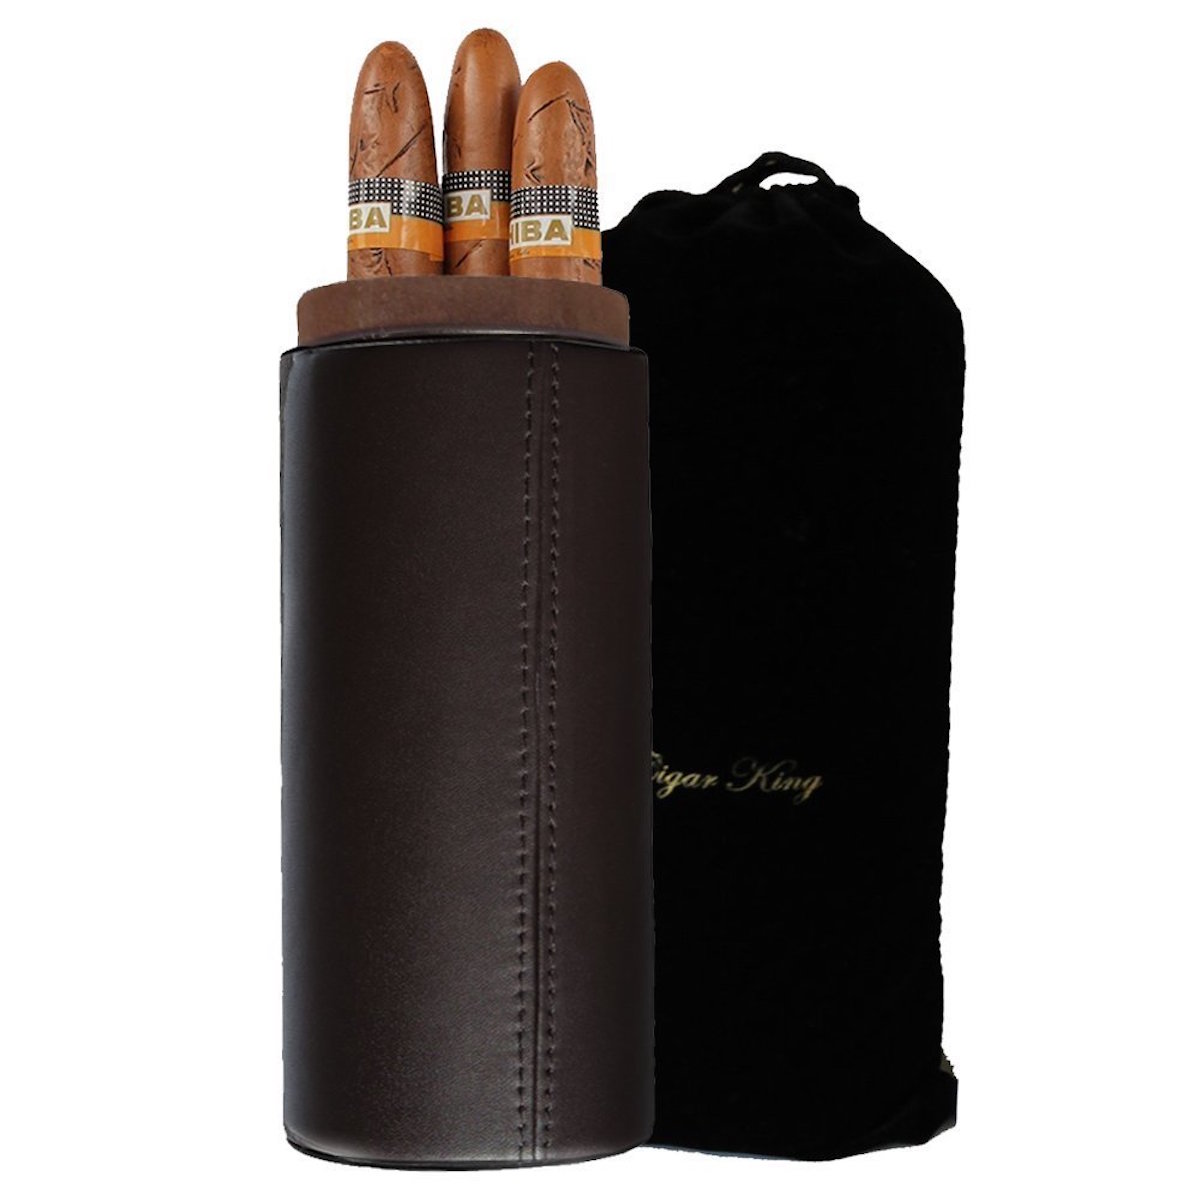 Nappa Brown Leather Cigar Humidor The Best Cigar Humidor for Your Collection